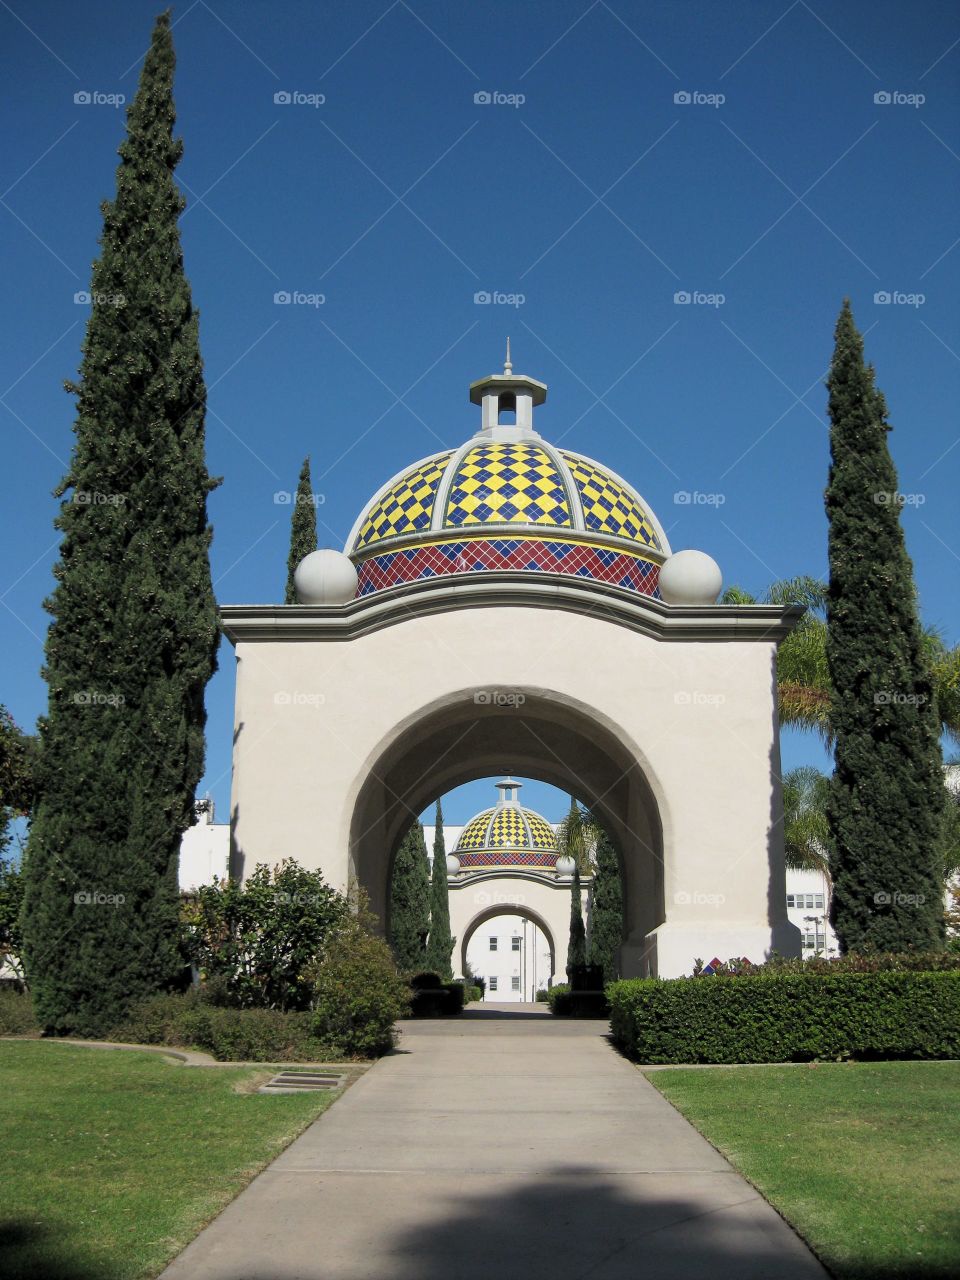 Perspective view of Mosaic domed structural architecture background of clear blue sky